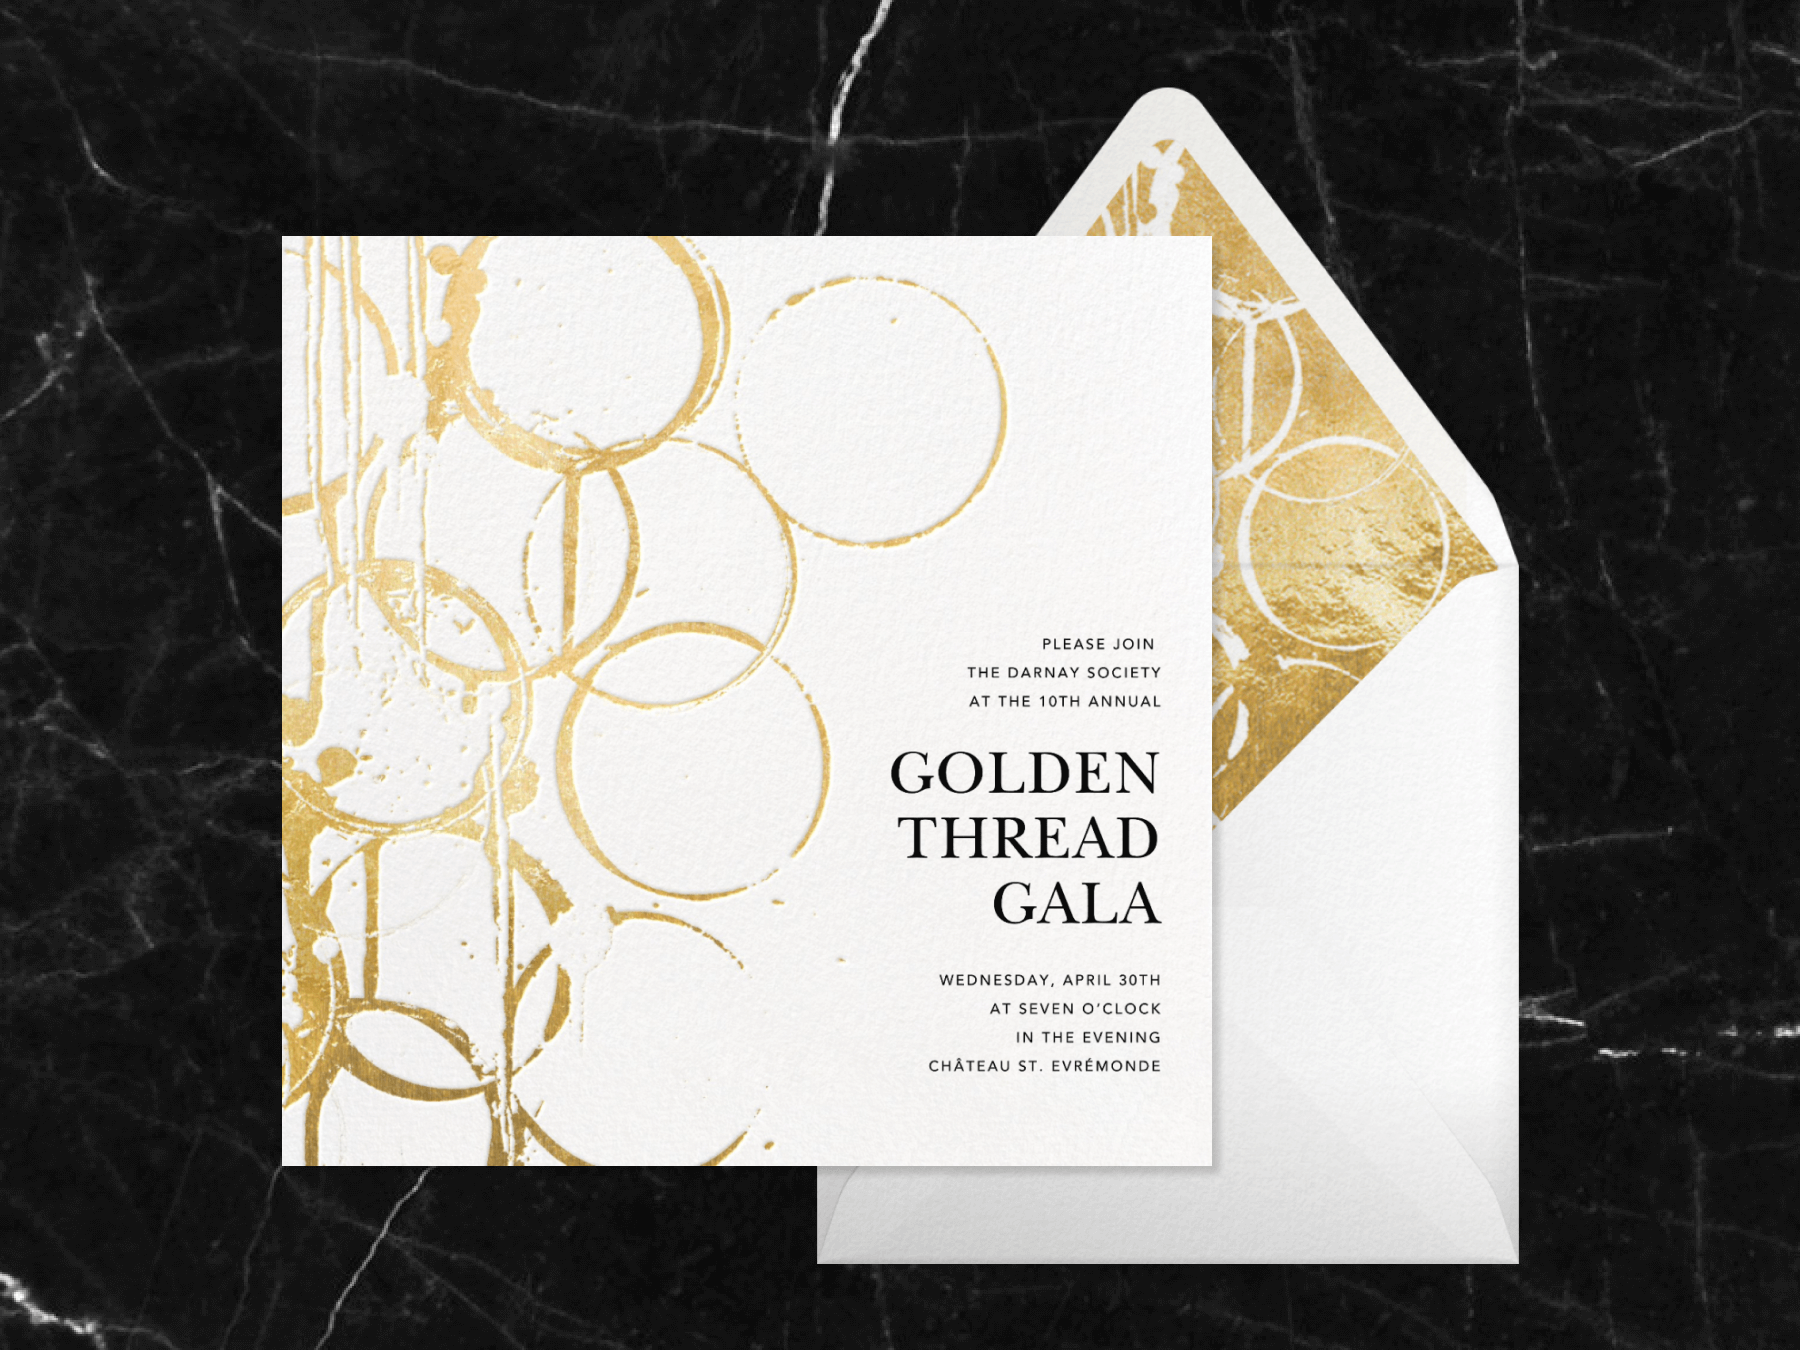 An invitation for the “Golden Thread Gala” with abstract, overlapping gold ring shapes that resembles condensation rings left from the bottom of a glass.